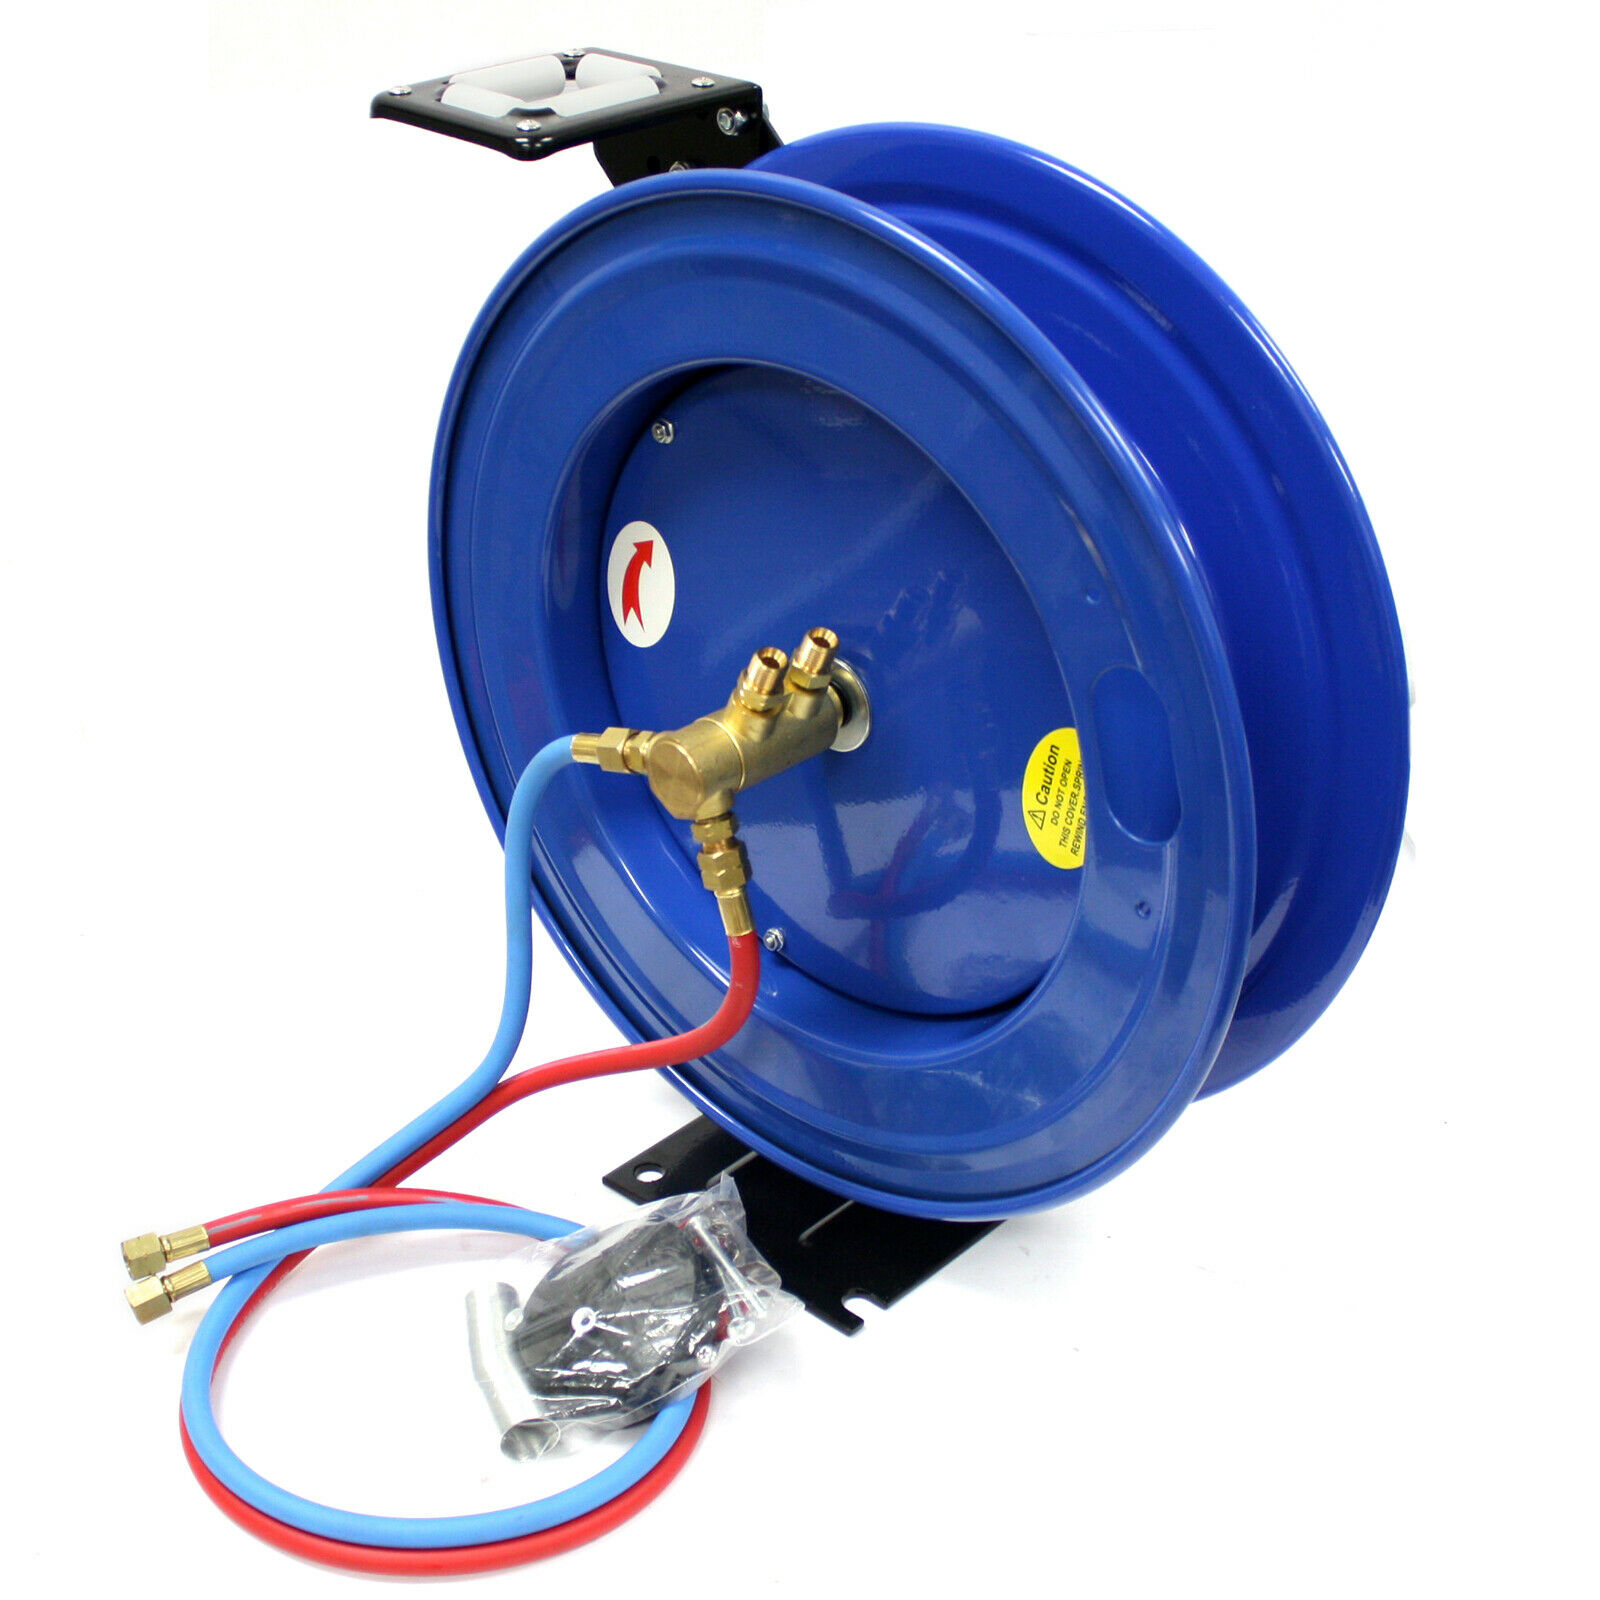 Automatic Retractable Twin Hose Reel for 50ft Oxygen Acetylene Welding Retractable Reel For Oxygen Tubing